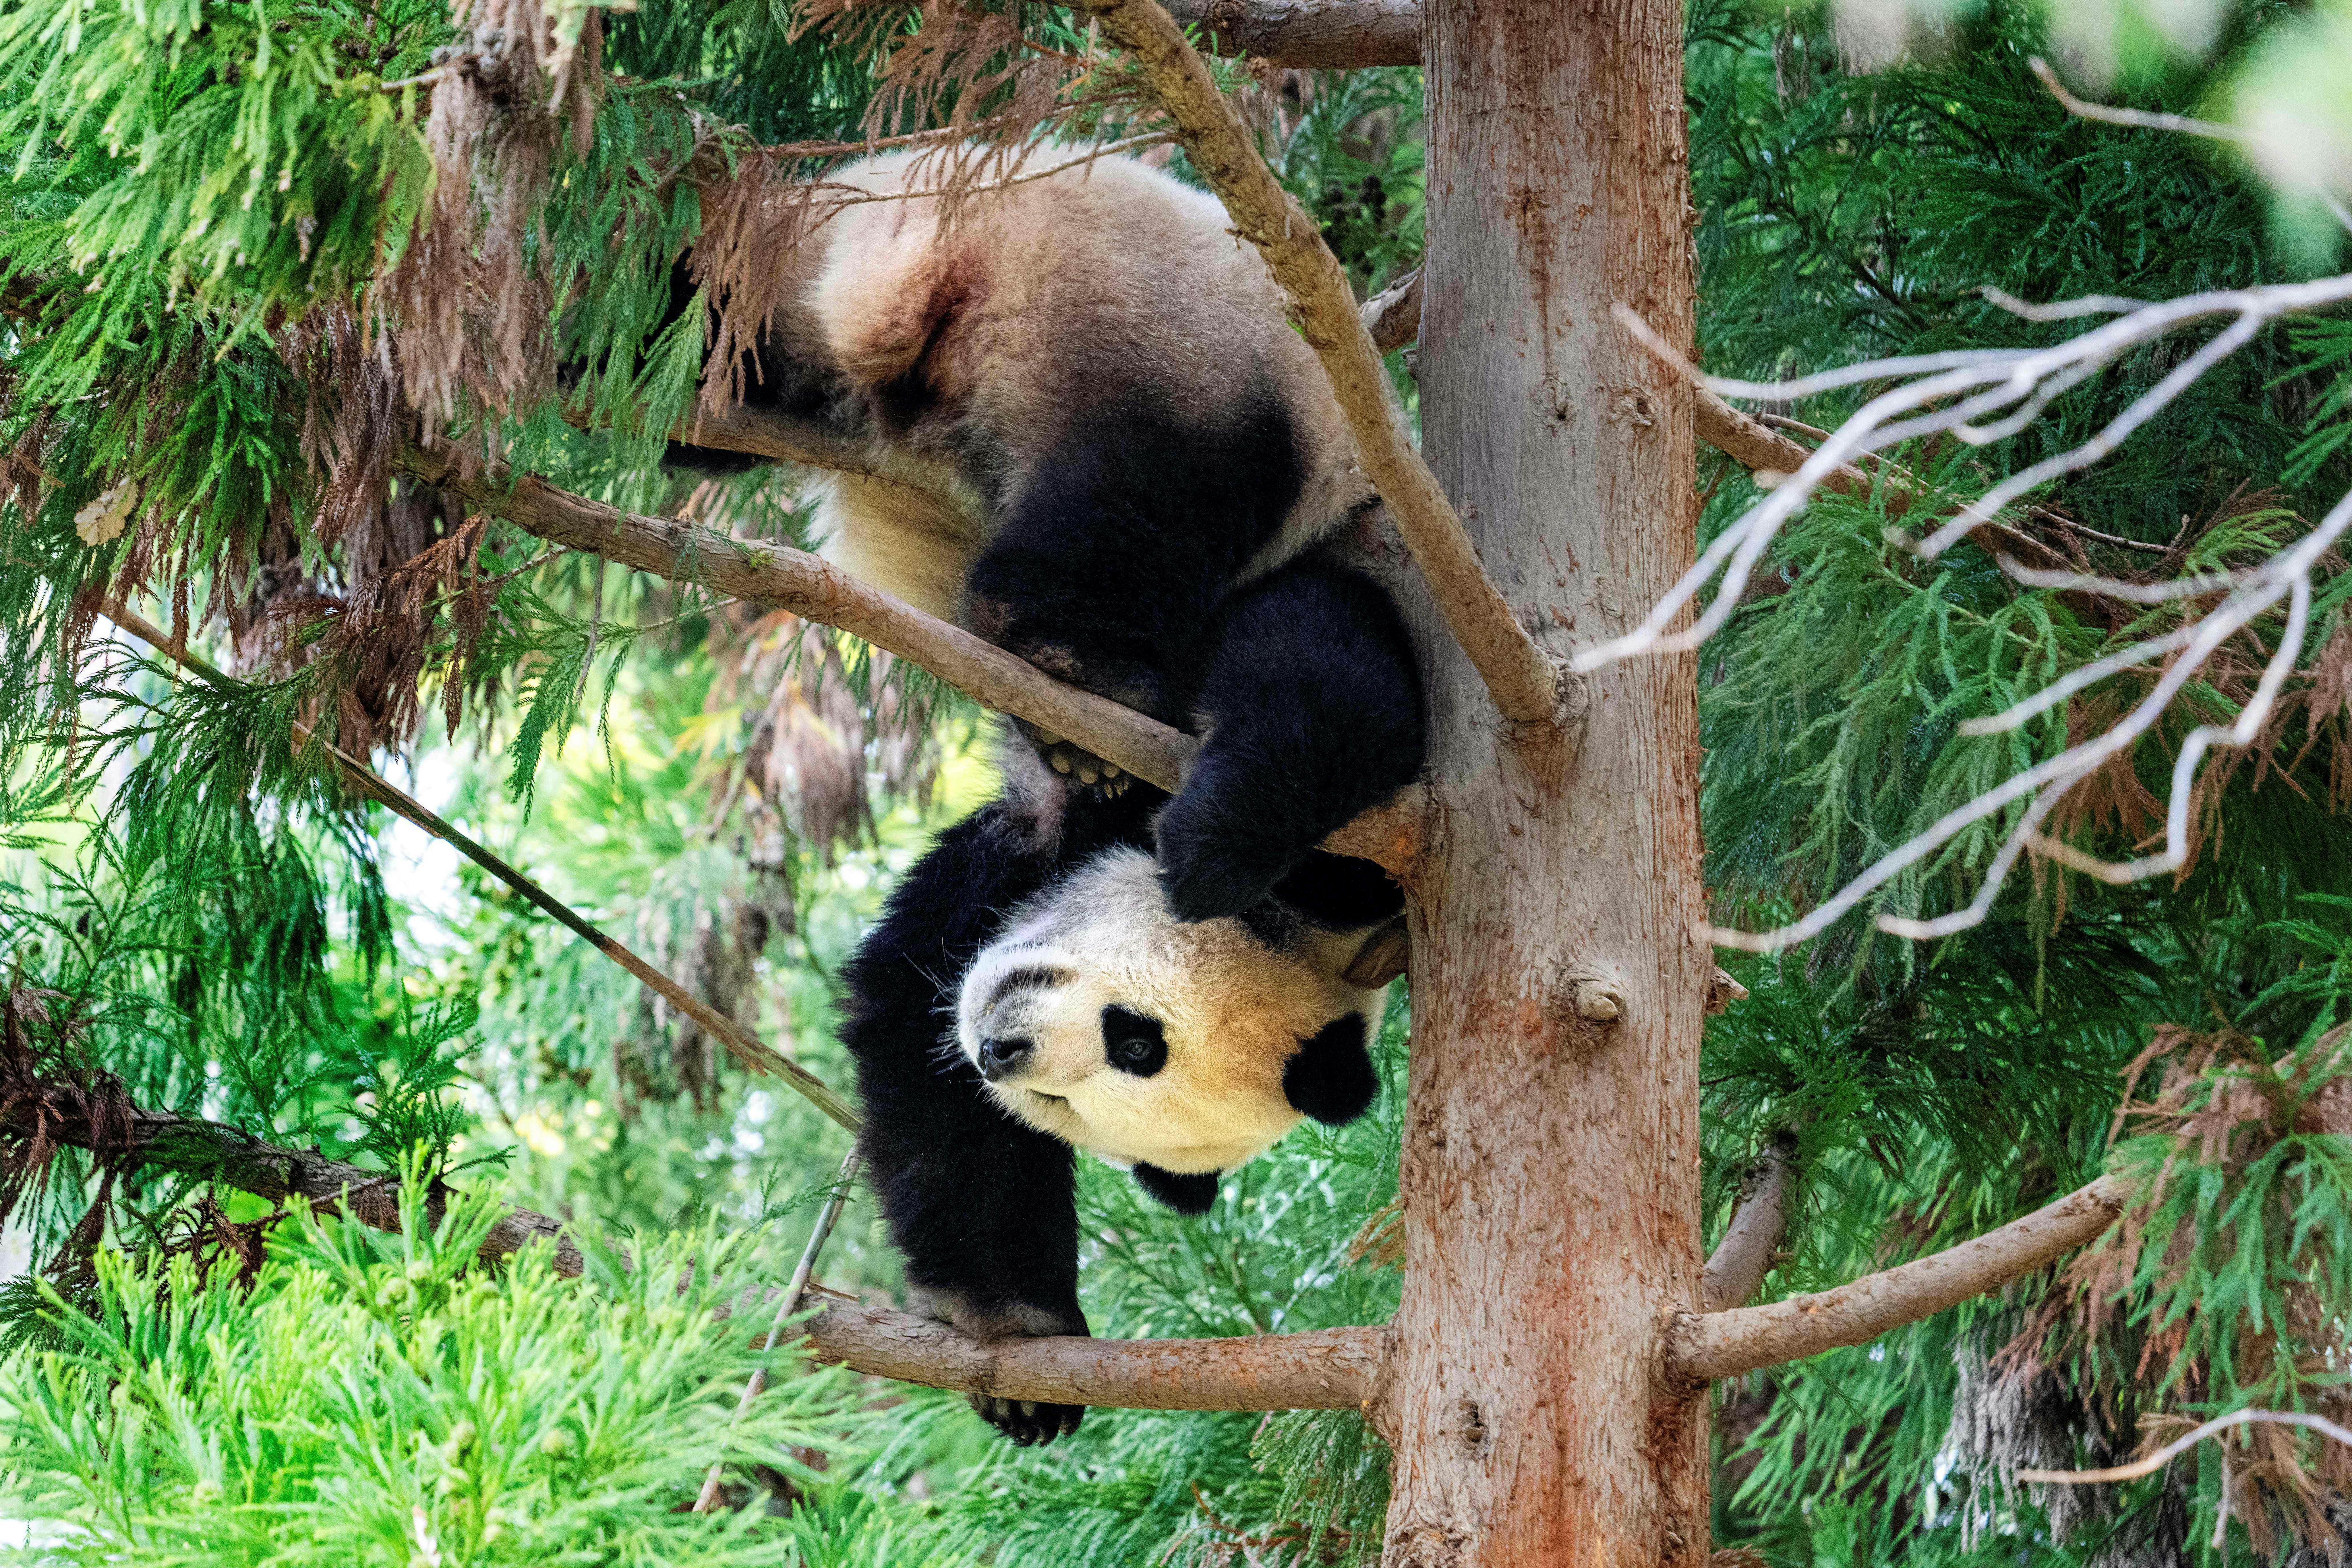 The D.C. Pandas Might Have Changed My Mind About Zoos